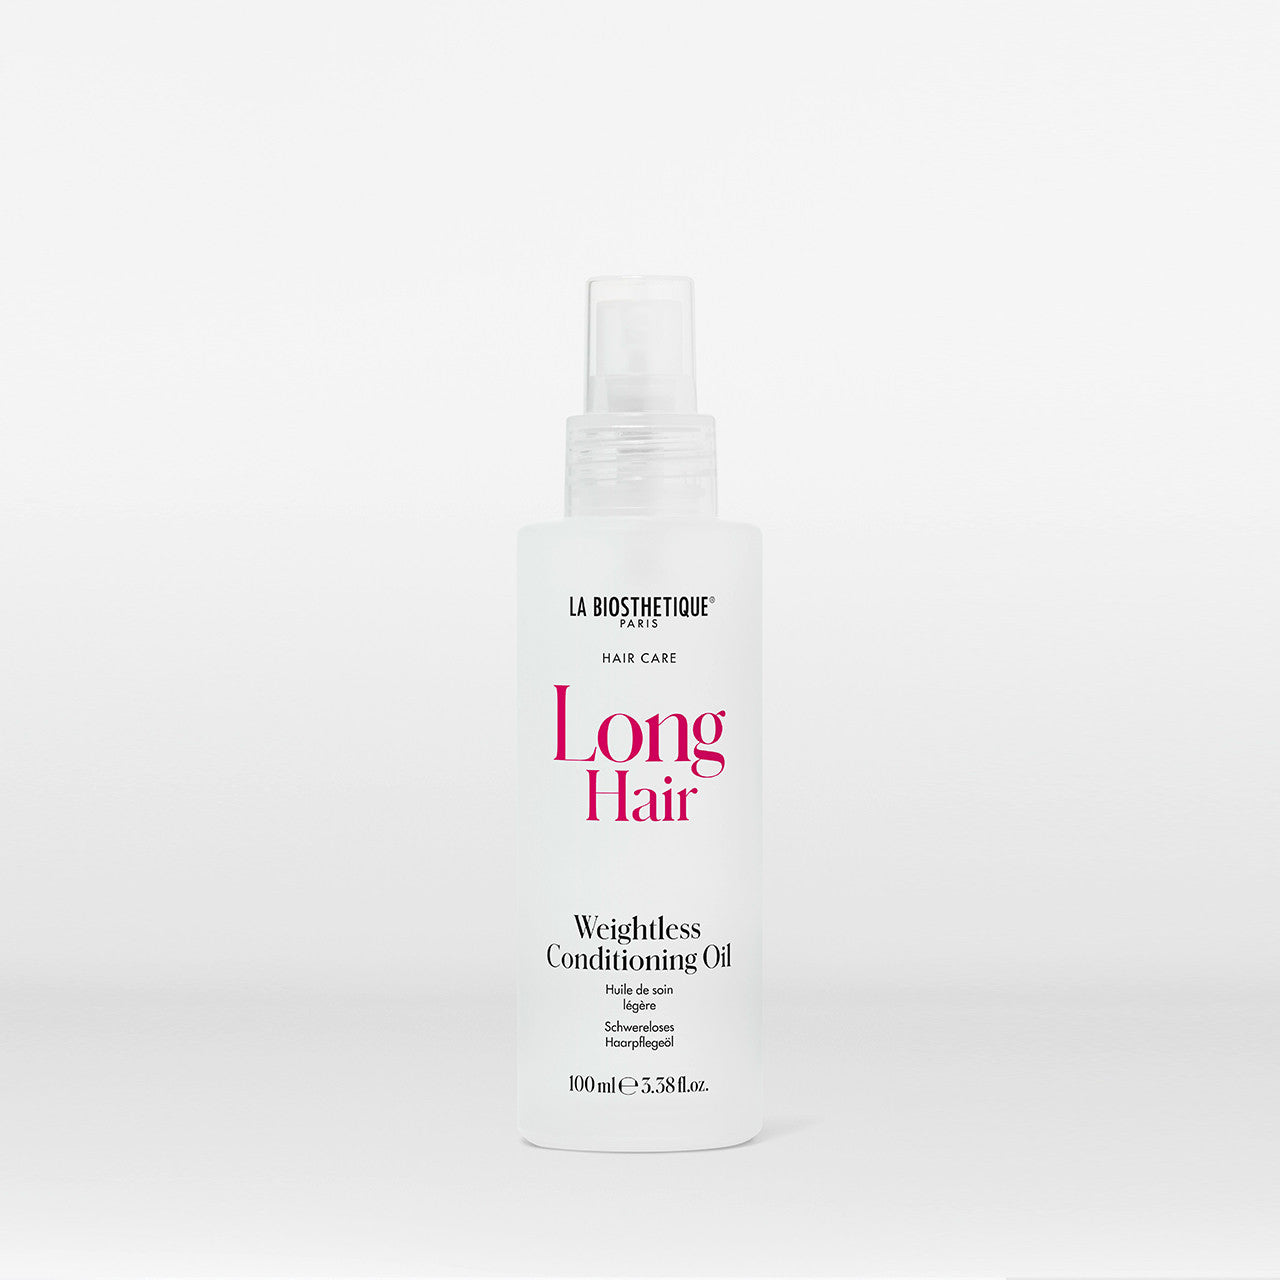 La Biosthetique's Long Hair Weightless Conditioning Oil 100ml